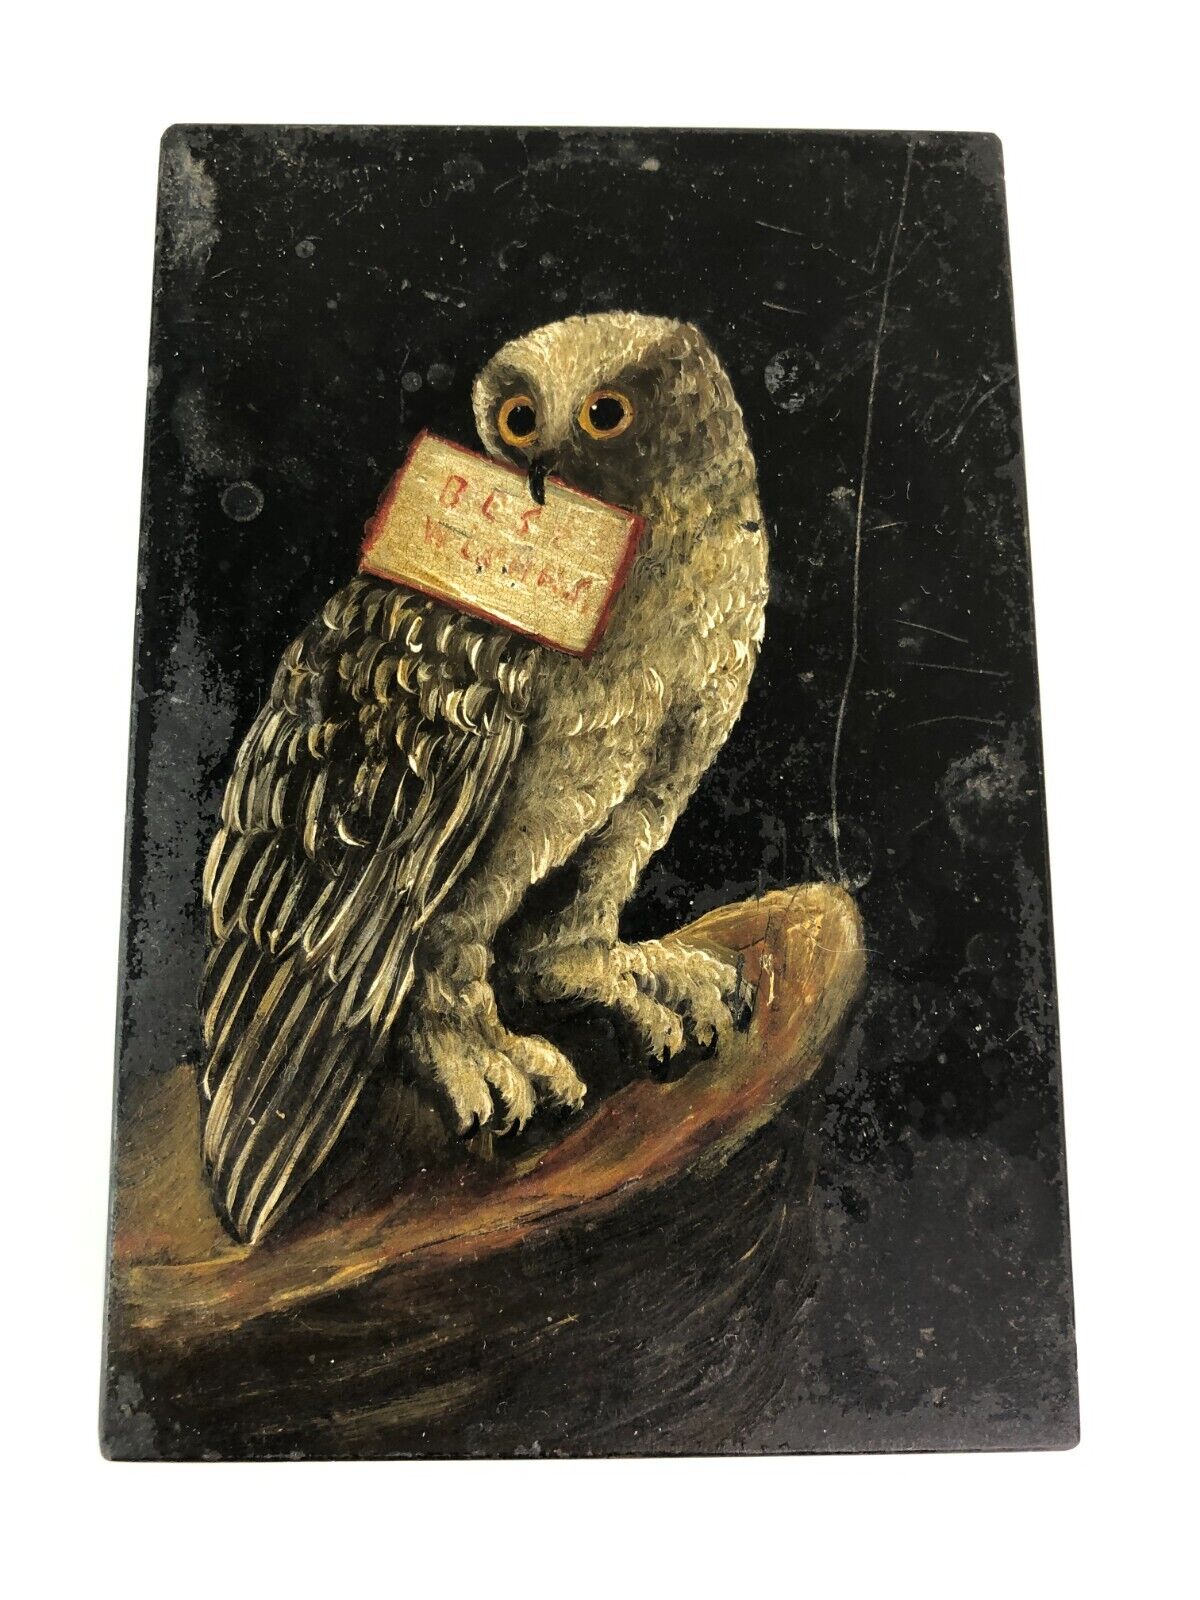 Miniature Hand Painted Owl on Black Granitite Paperweight